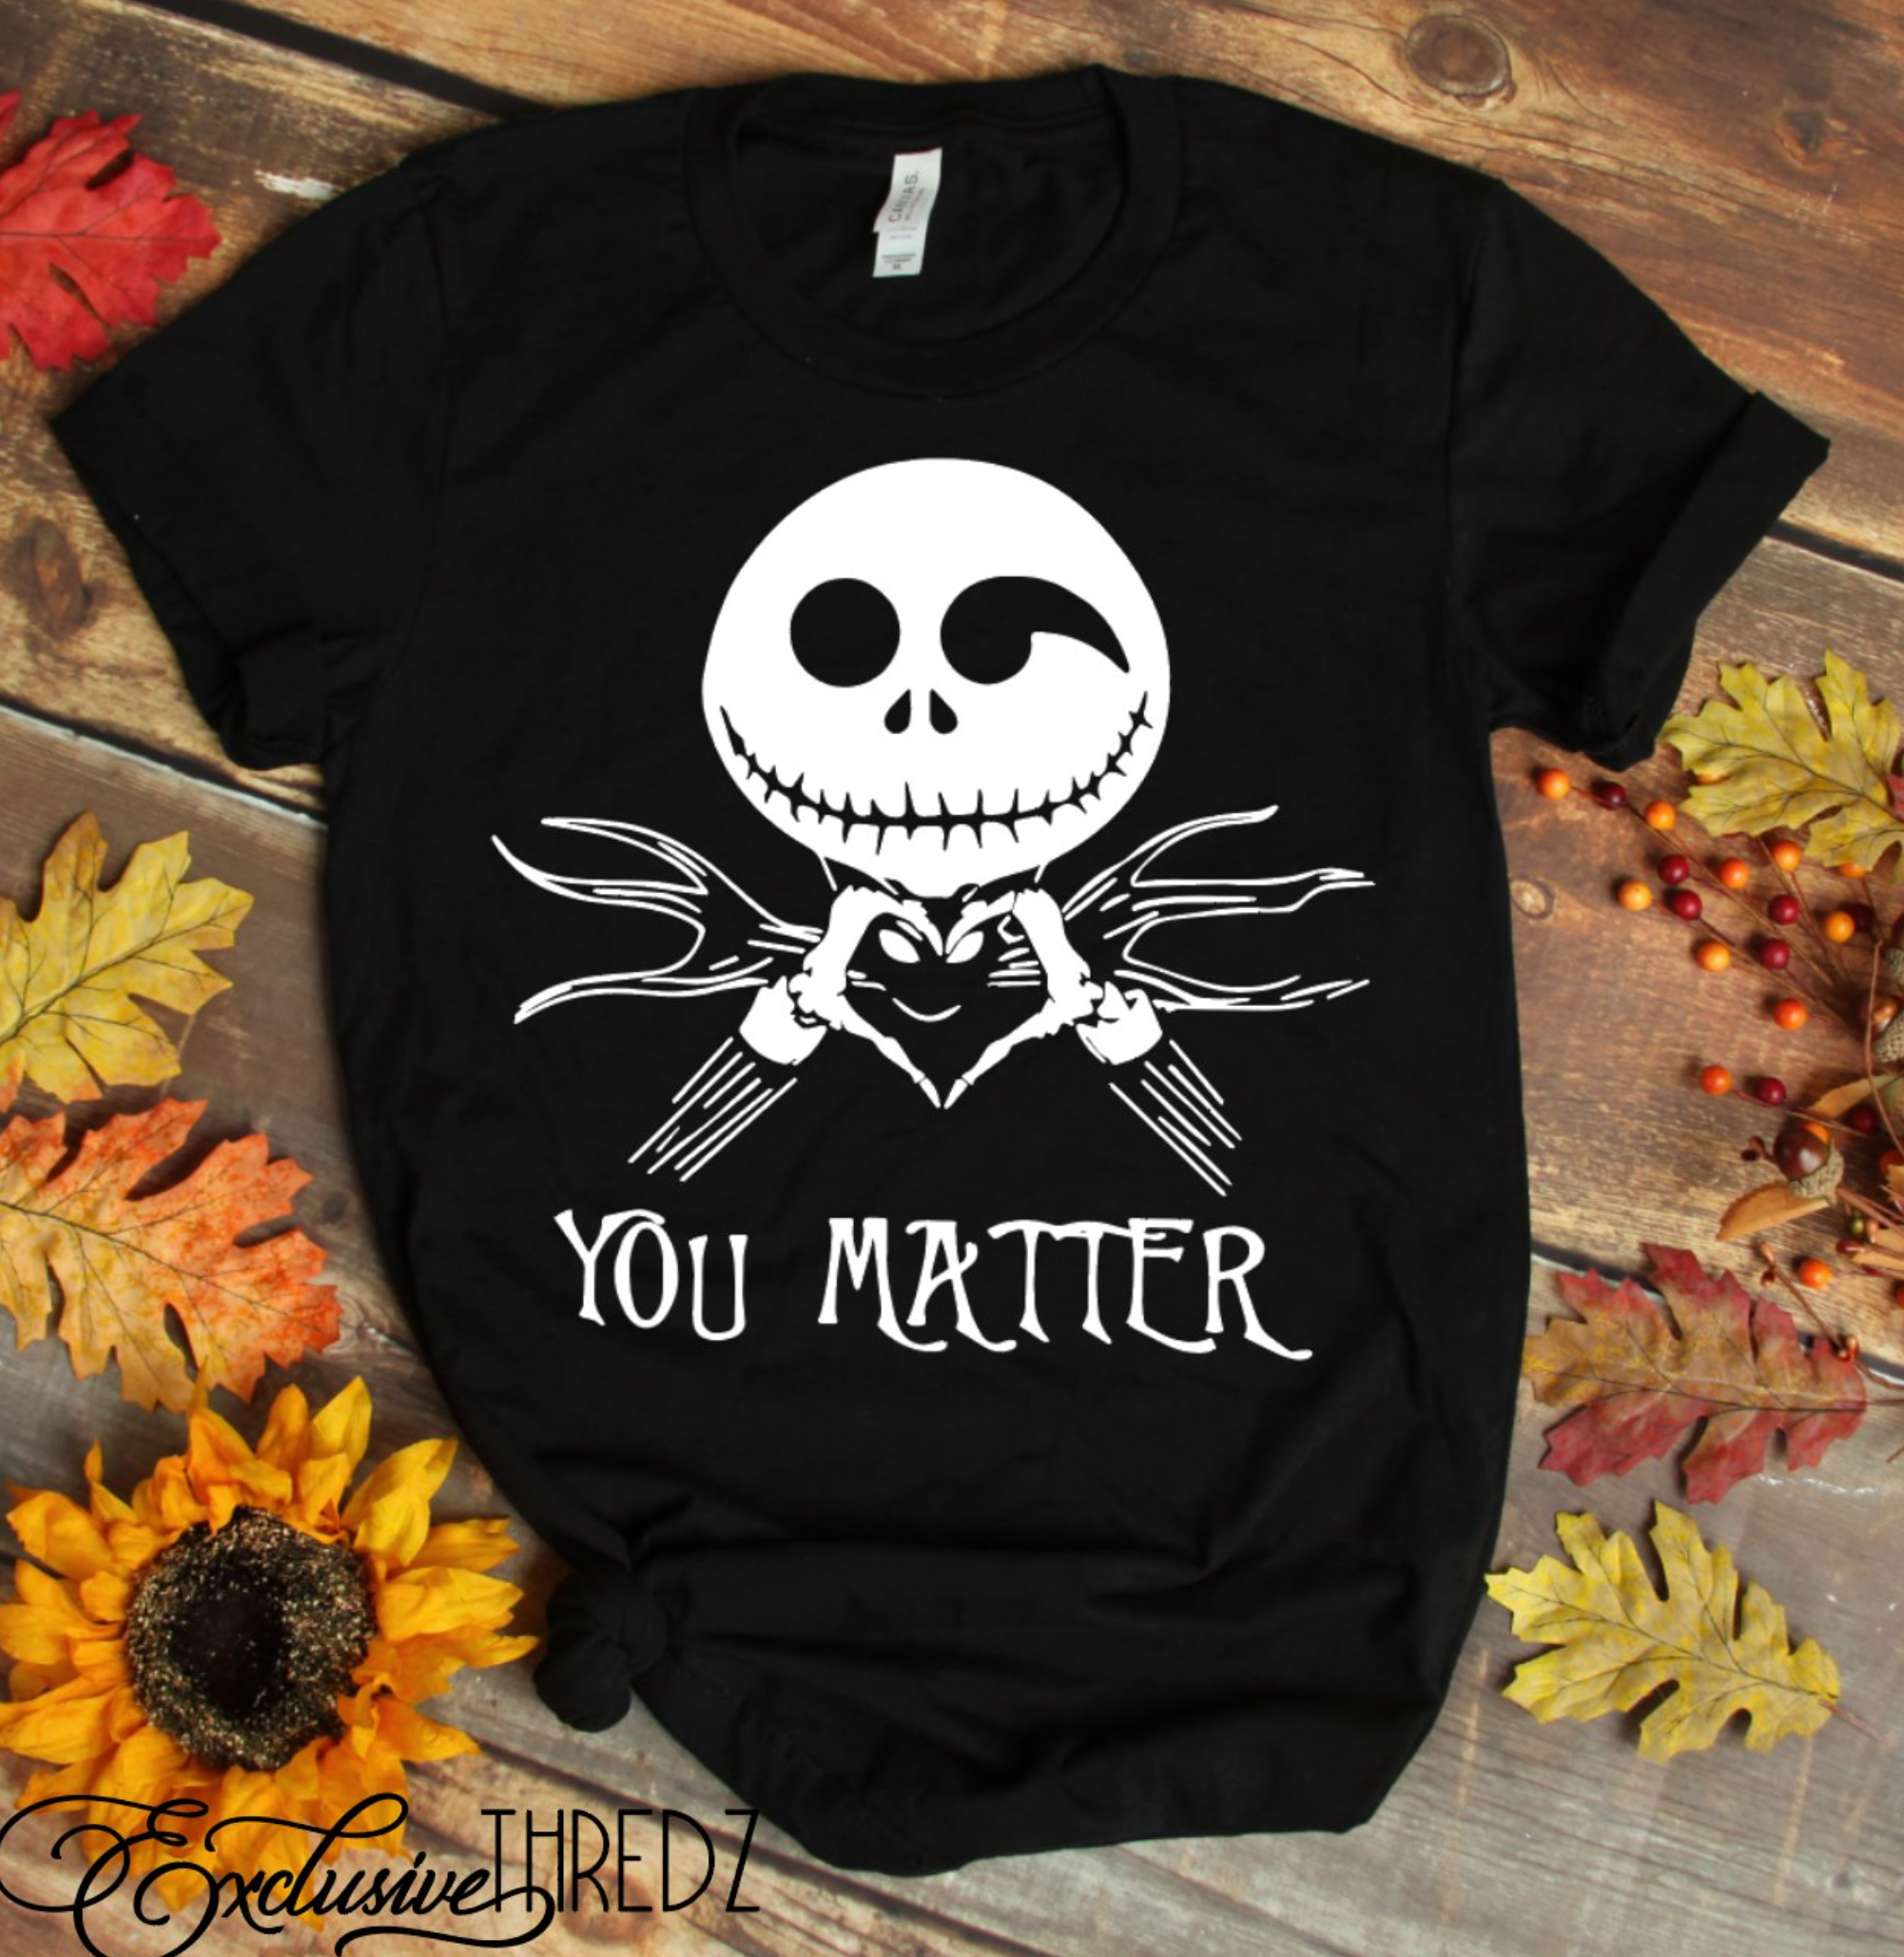 YOU MATTER-Graphic Tee- Simply Simpson's Boutique is a Women's Online Fashion Boutique Located in Jupiter, Florida